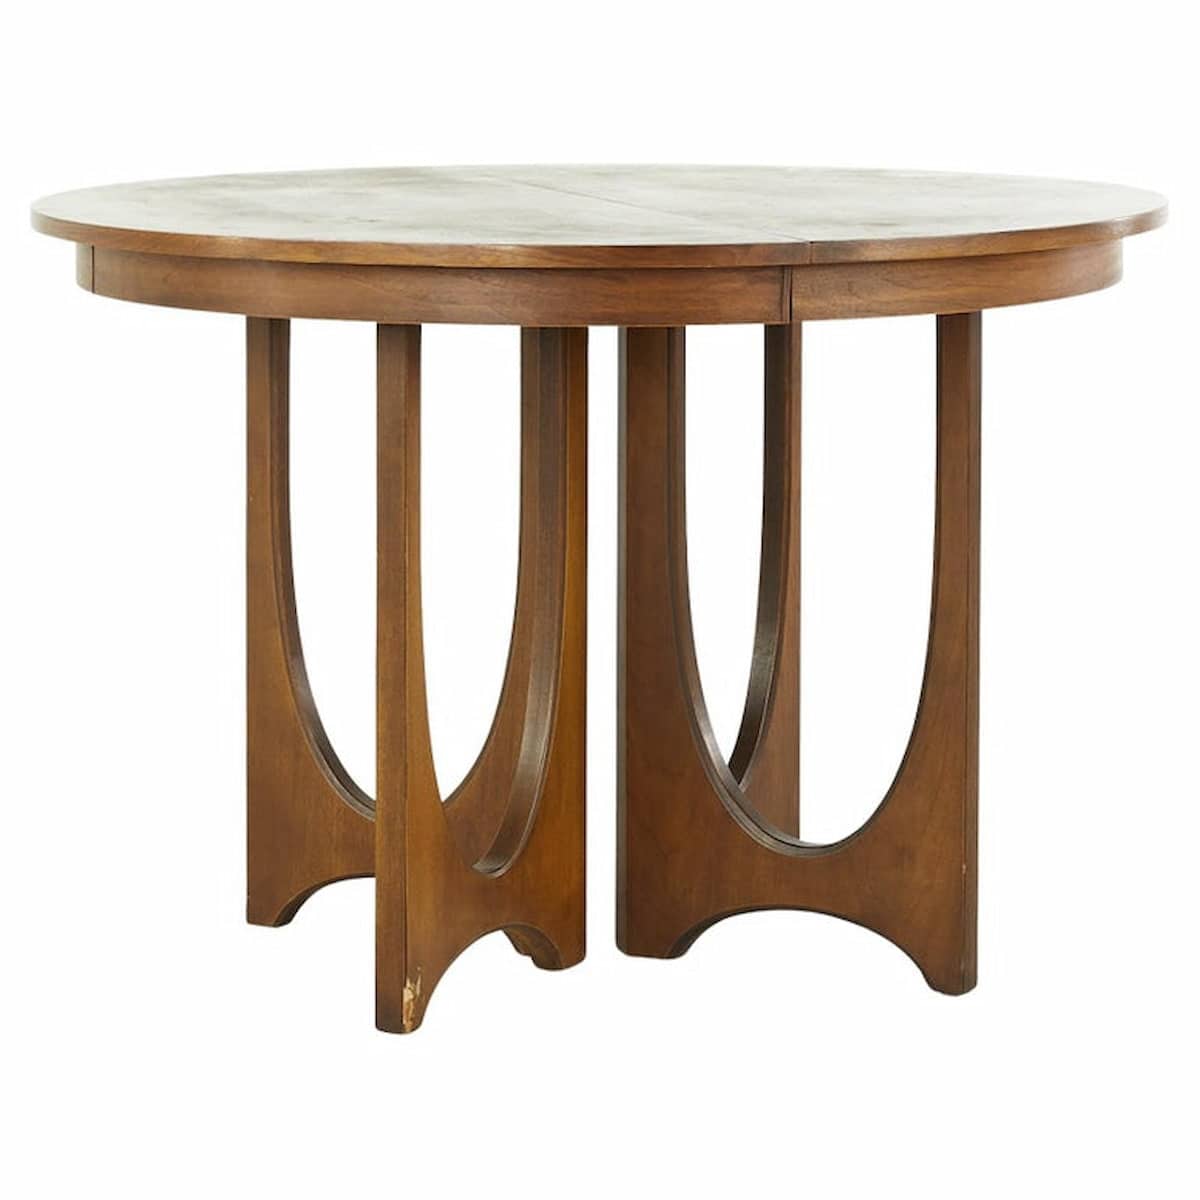 Broyhill Brasilia Mid Century Pedestal Dining Table with 3 Leaves